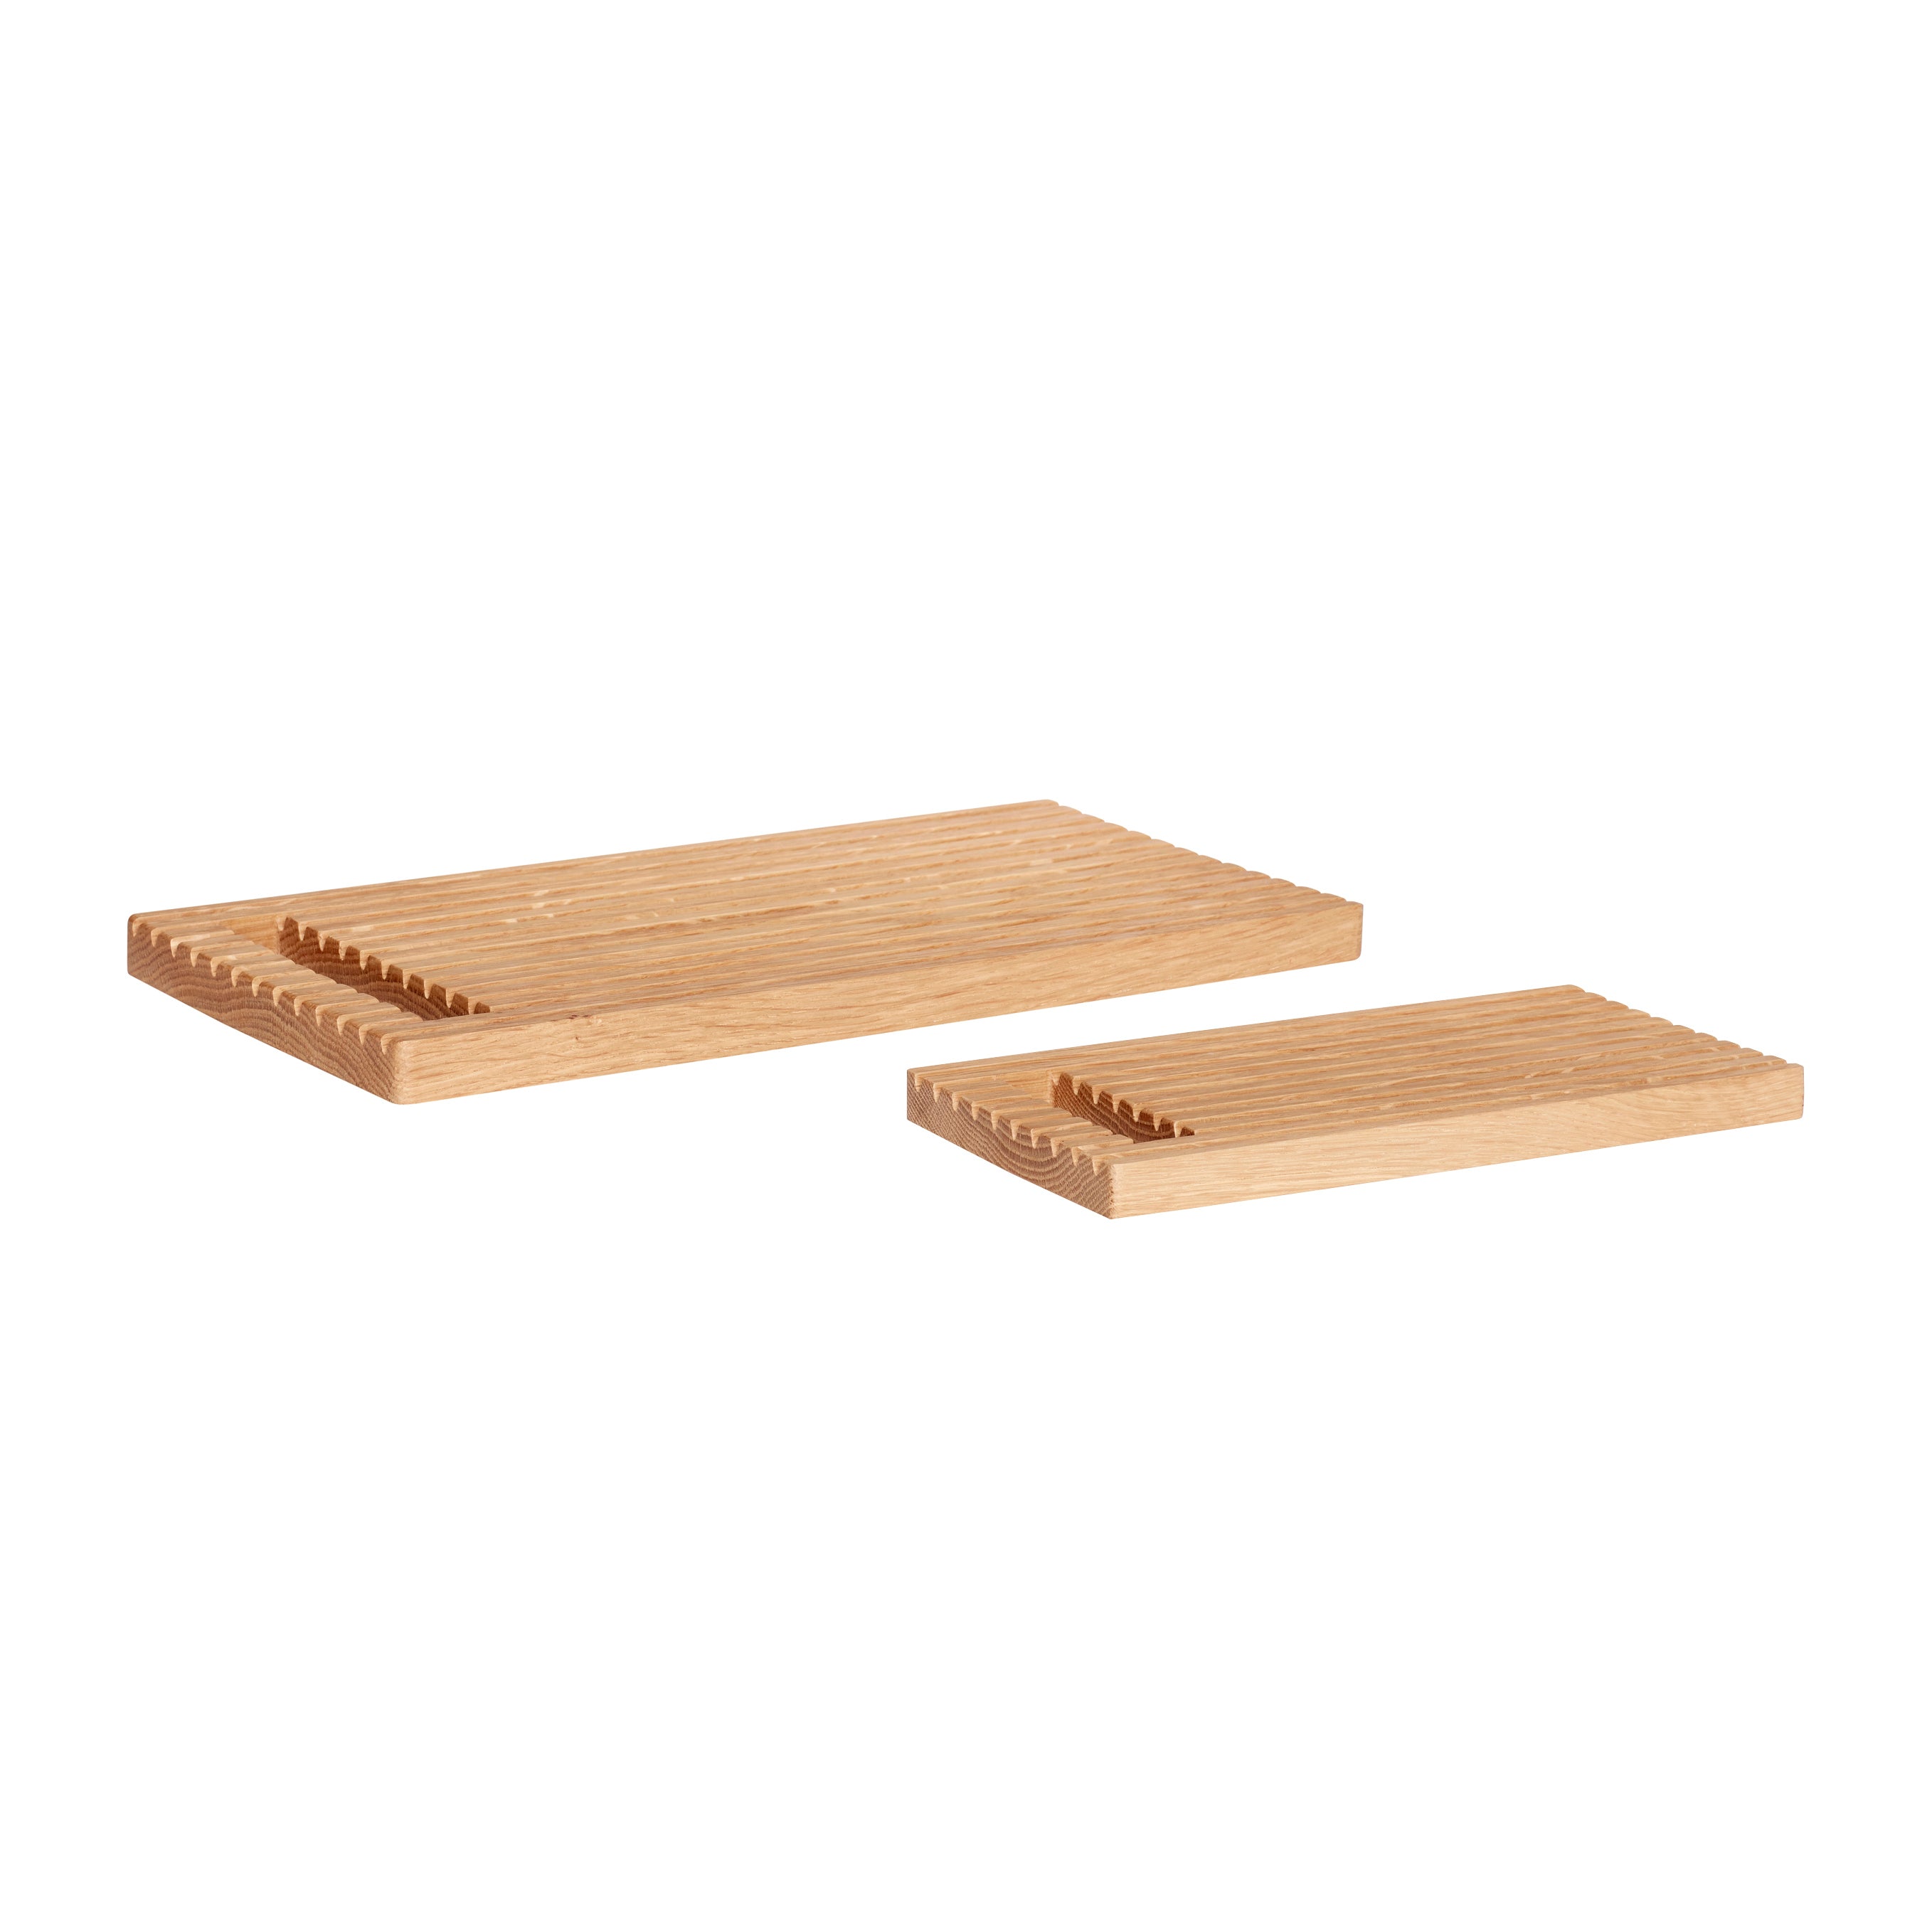 Ribbed cutting boards